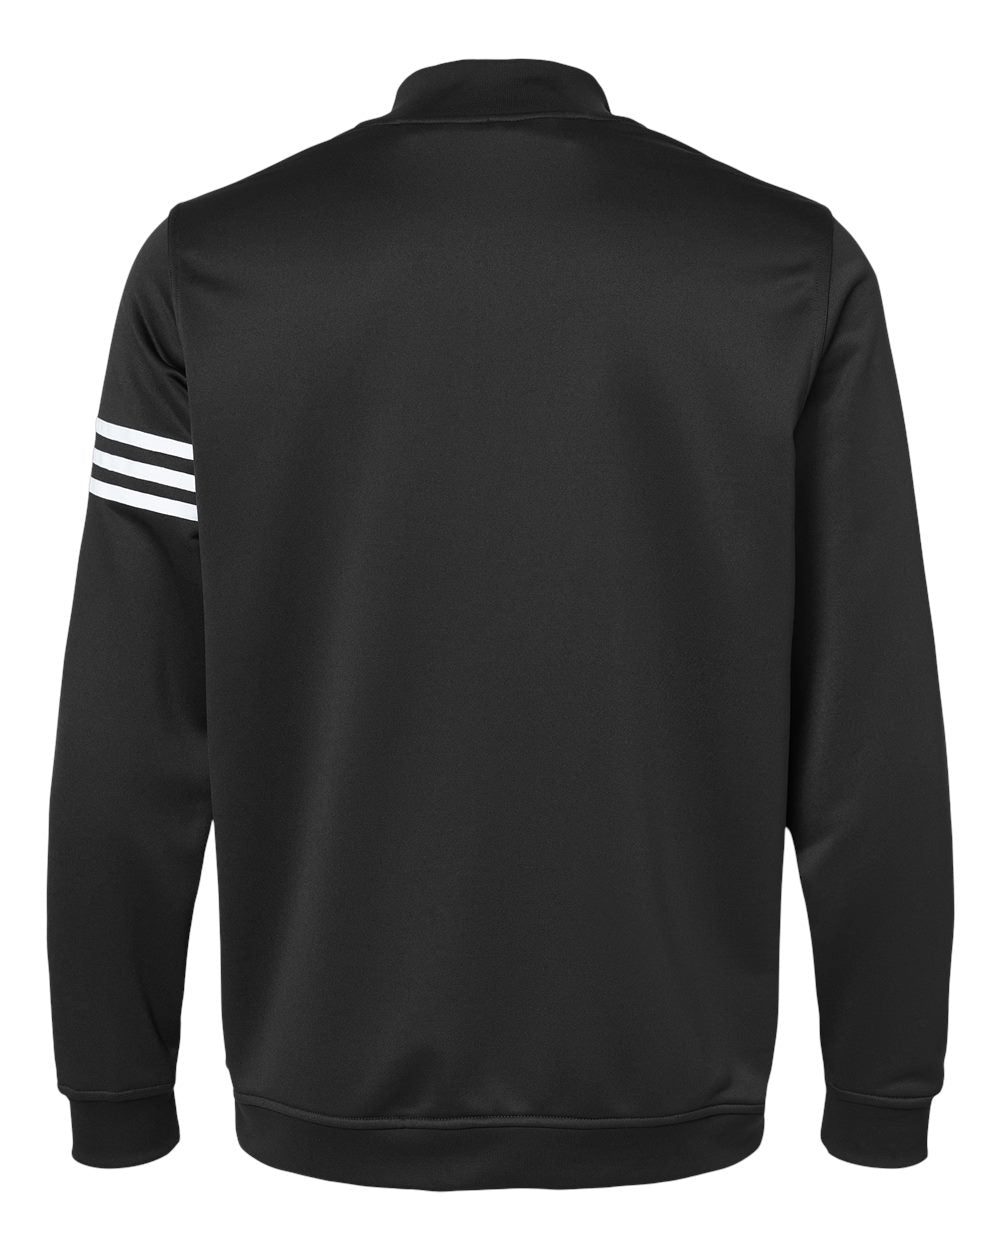 Hardwood - Adidas - 3-Stripes French Terry Quarter-Zip Pullover - IMS Apparel A190Black-S